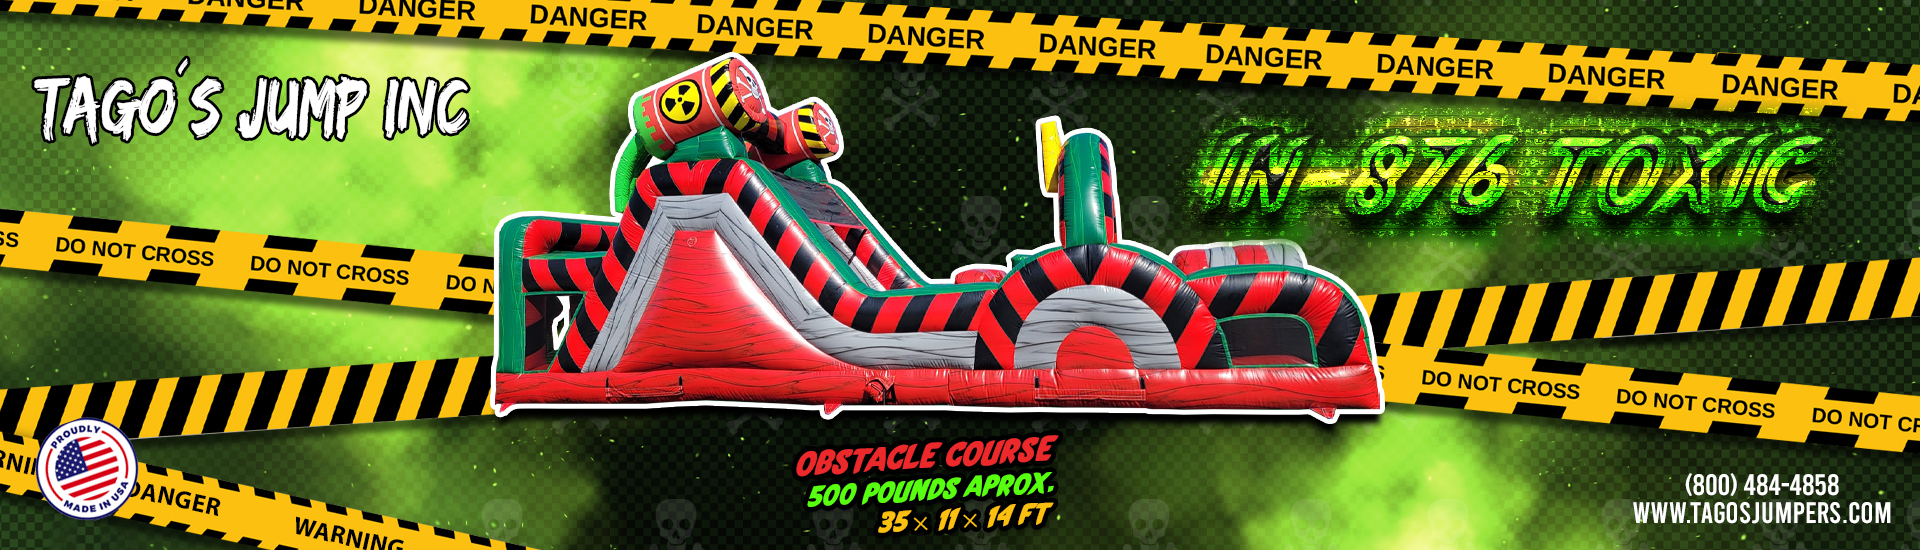 Toxic inflatable course